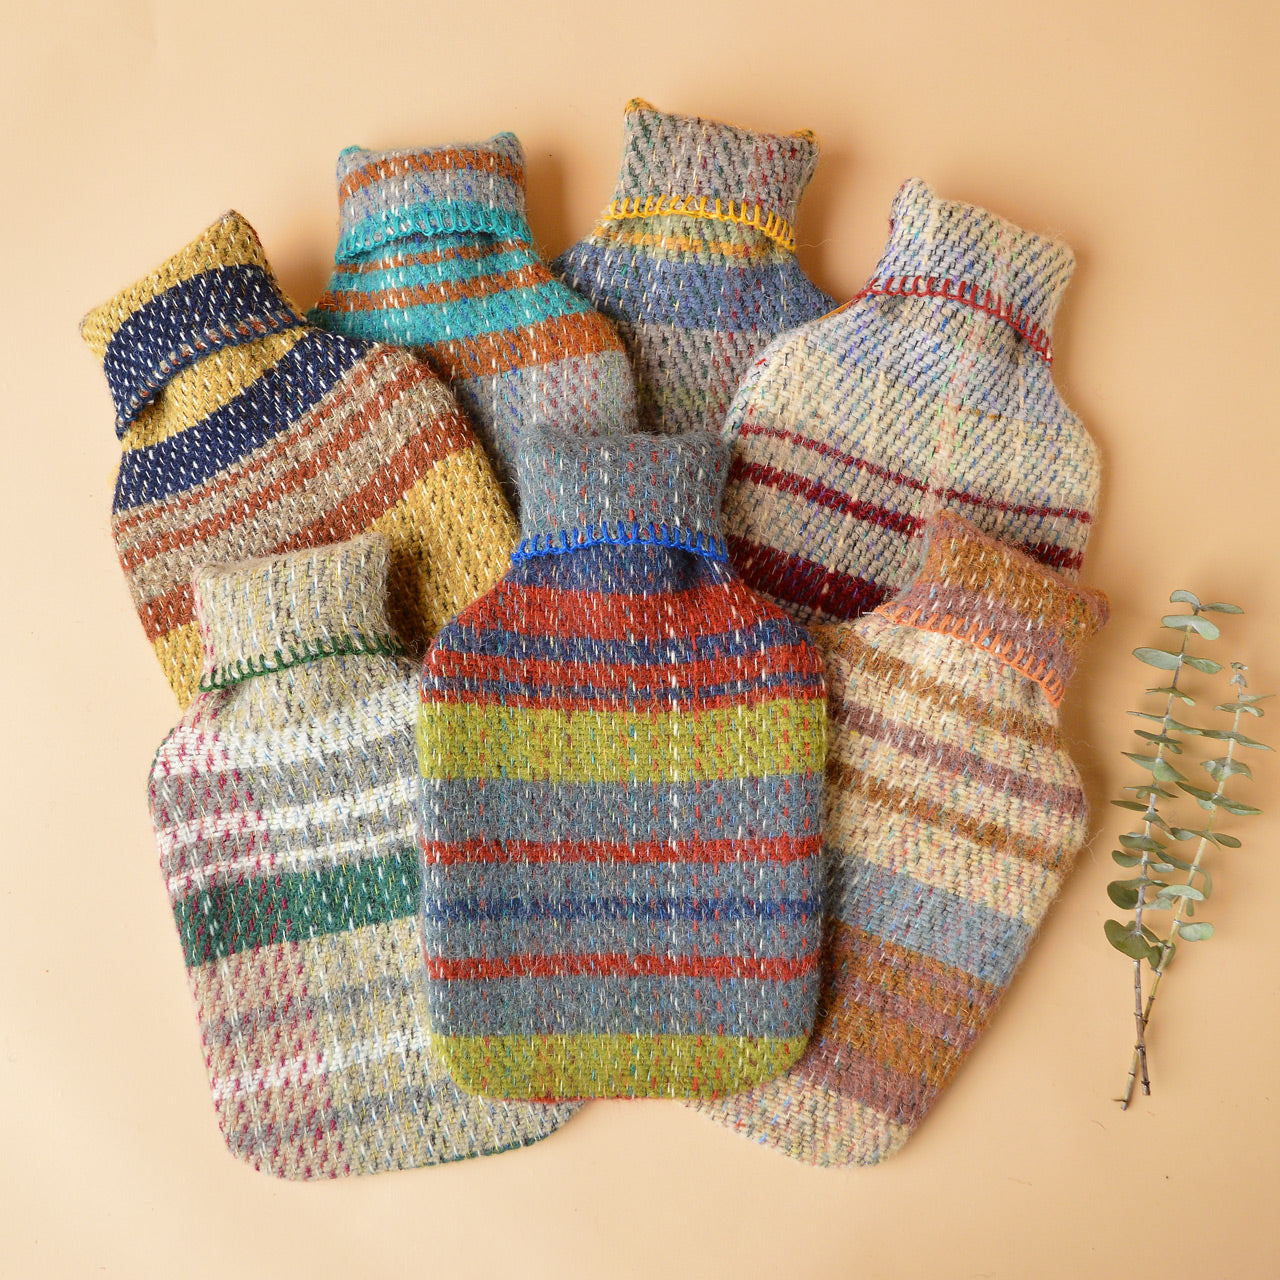 Hot Water Bottle with Plaid 100% Recycled Wool Cover